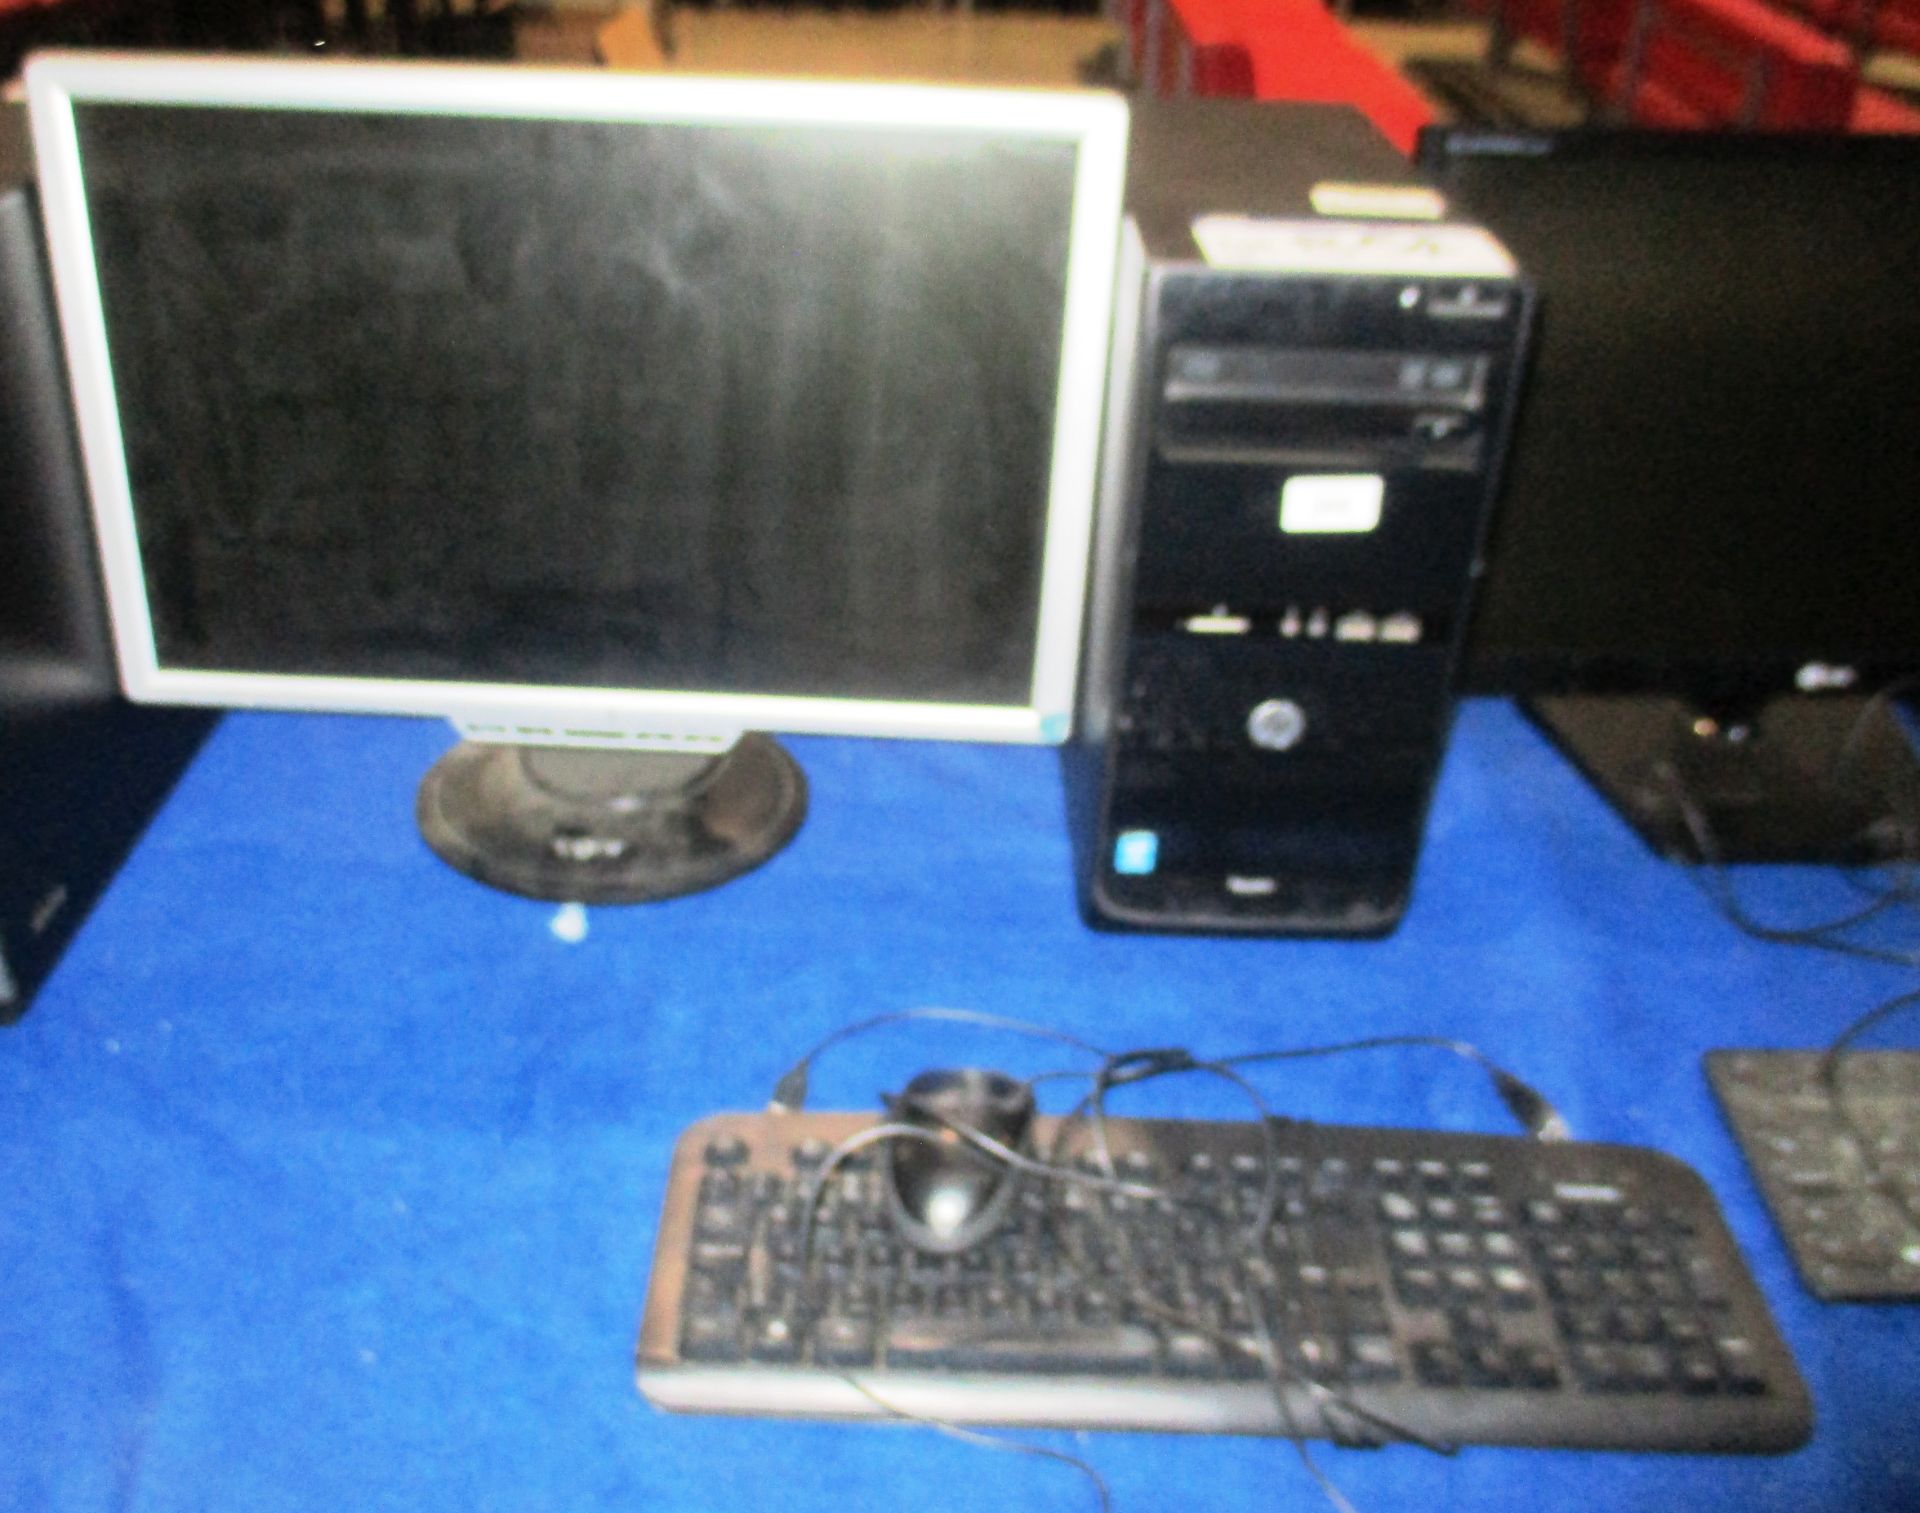 A HP Pro tower computer - power lead complete with a GNR 22" LCD monitor - power lead,